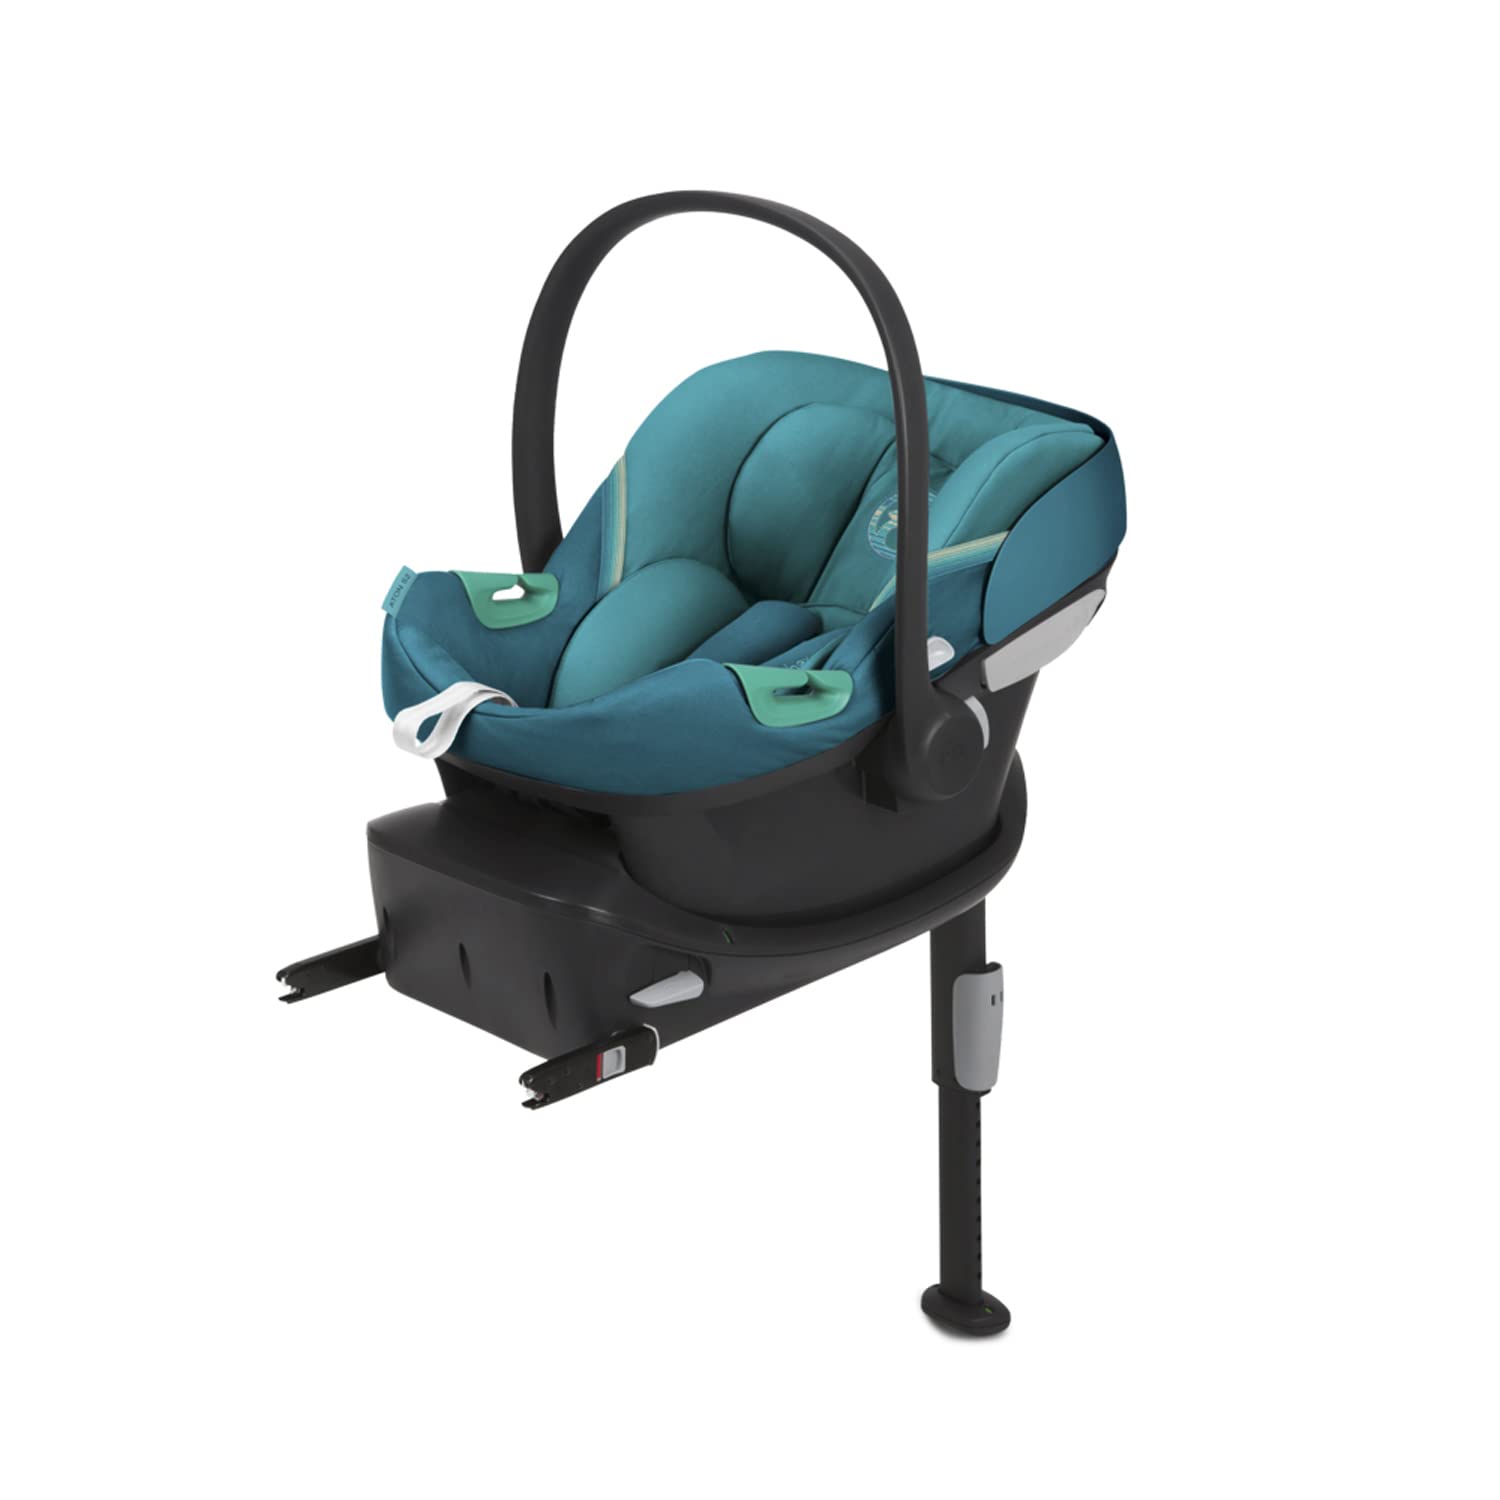 CYBEX Gold Aton S2 i-Size Car Seat with Newborn Insert, SensorSafe Compatible, From Birth to Approx. 24 Months, Max. 13 kg, Urban Collection, River Blue